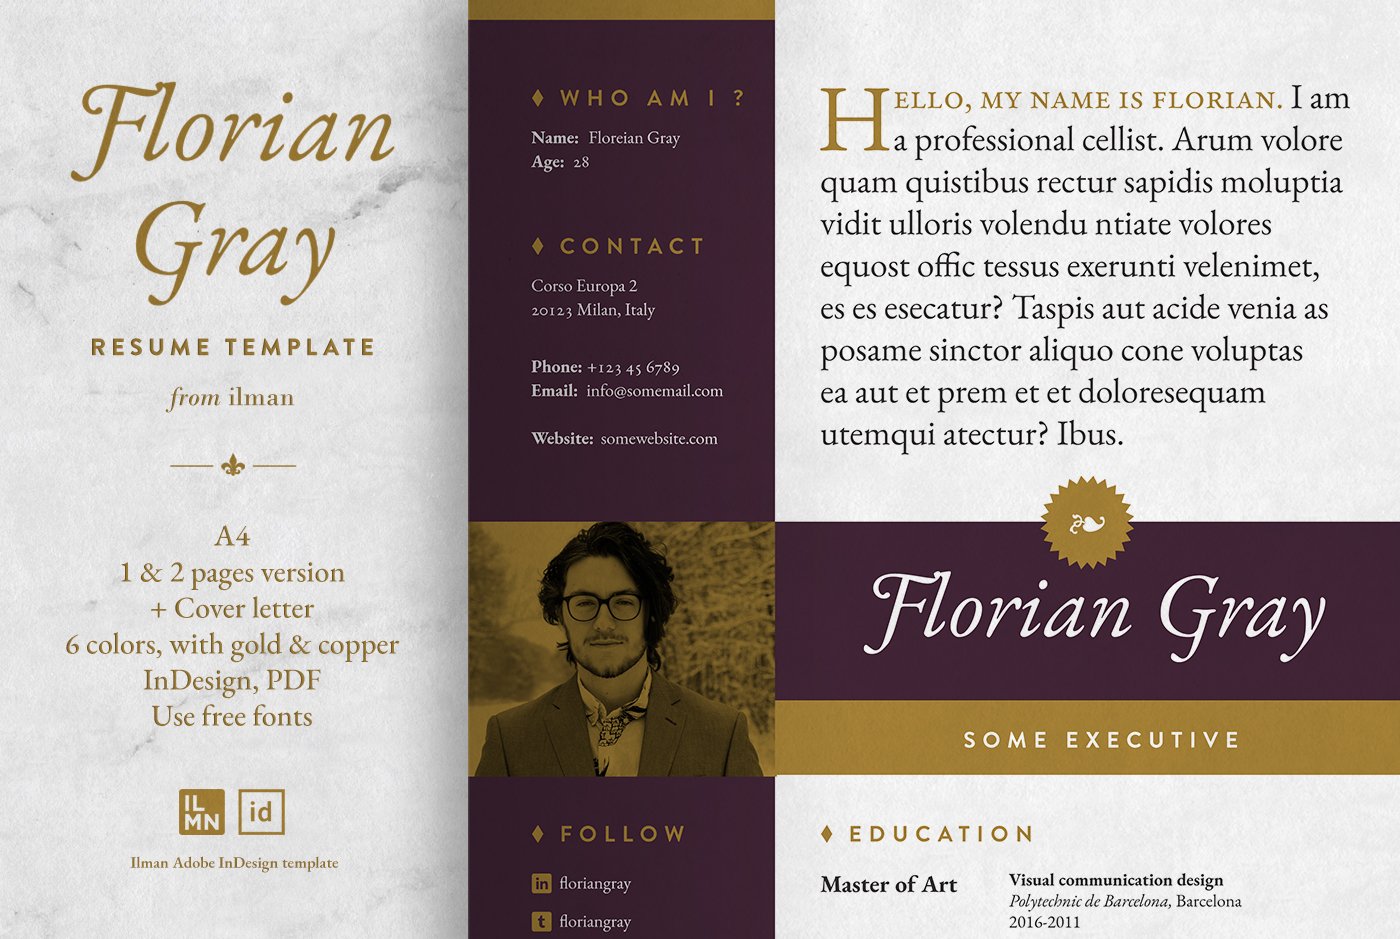 Florian Gray - Resume Template cover image.